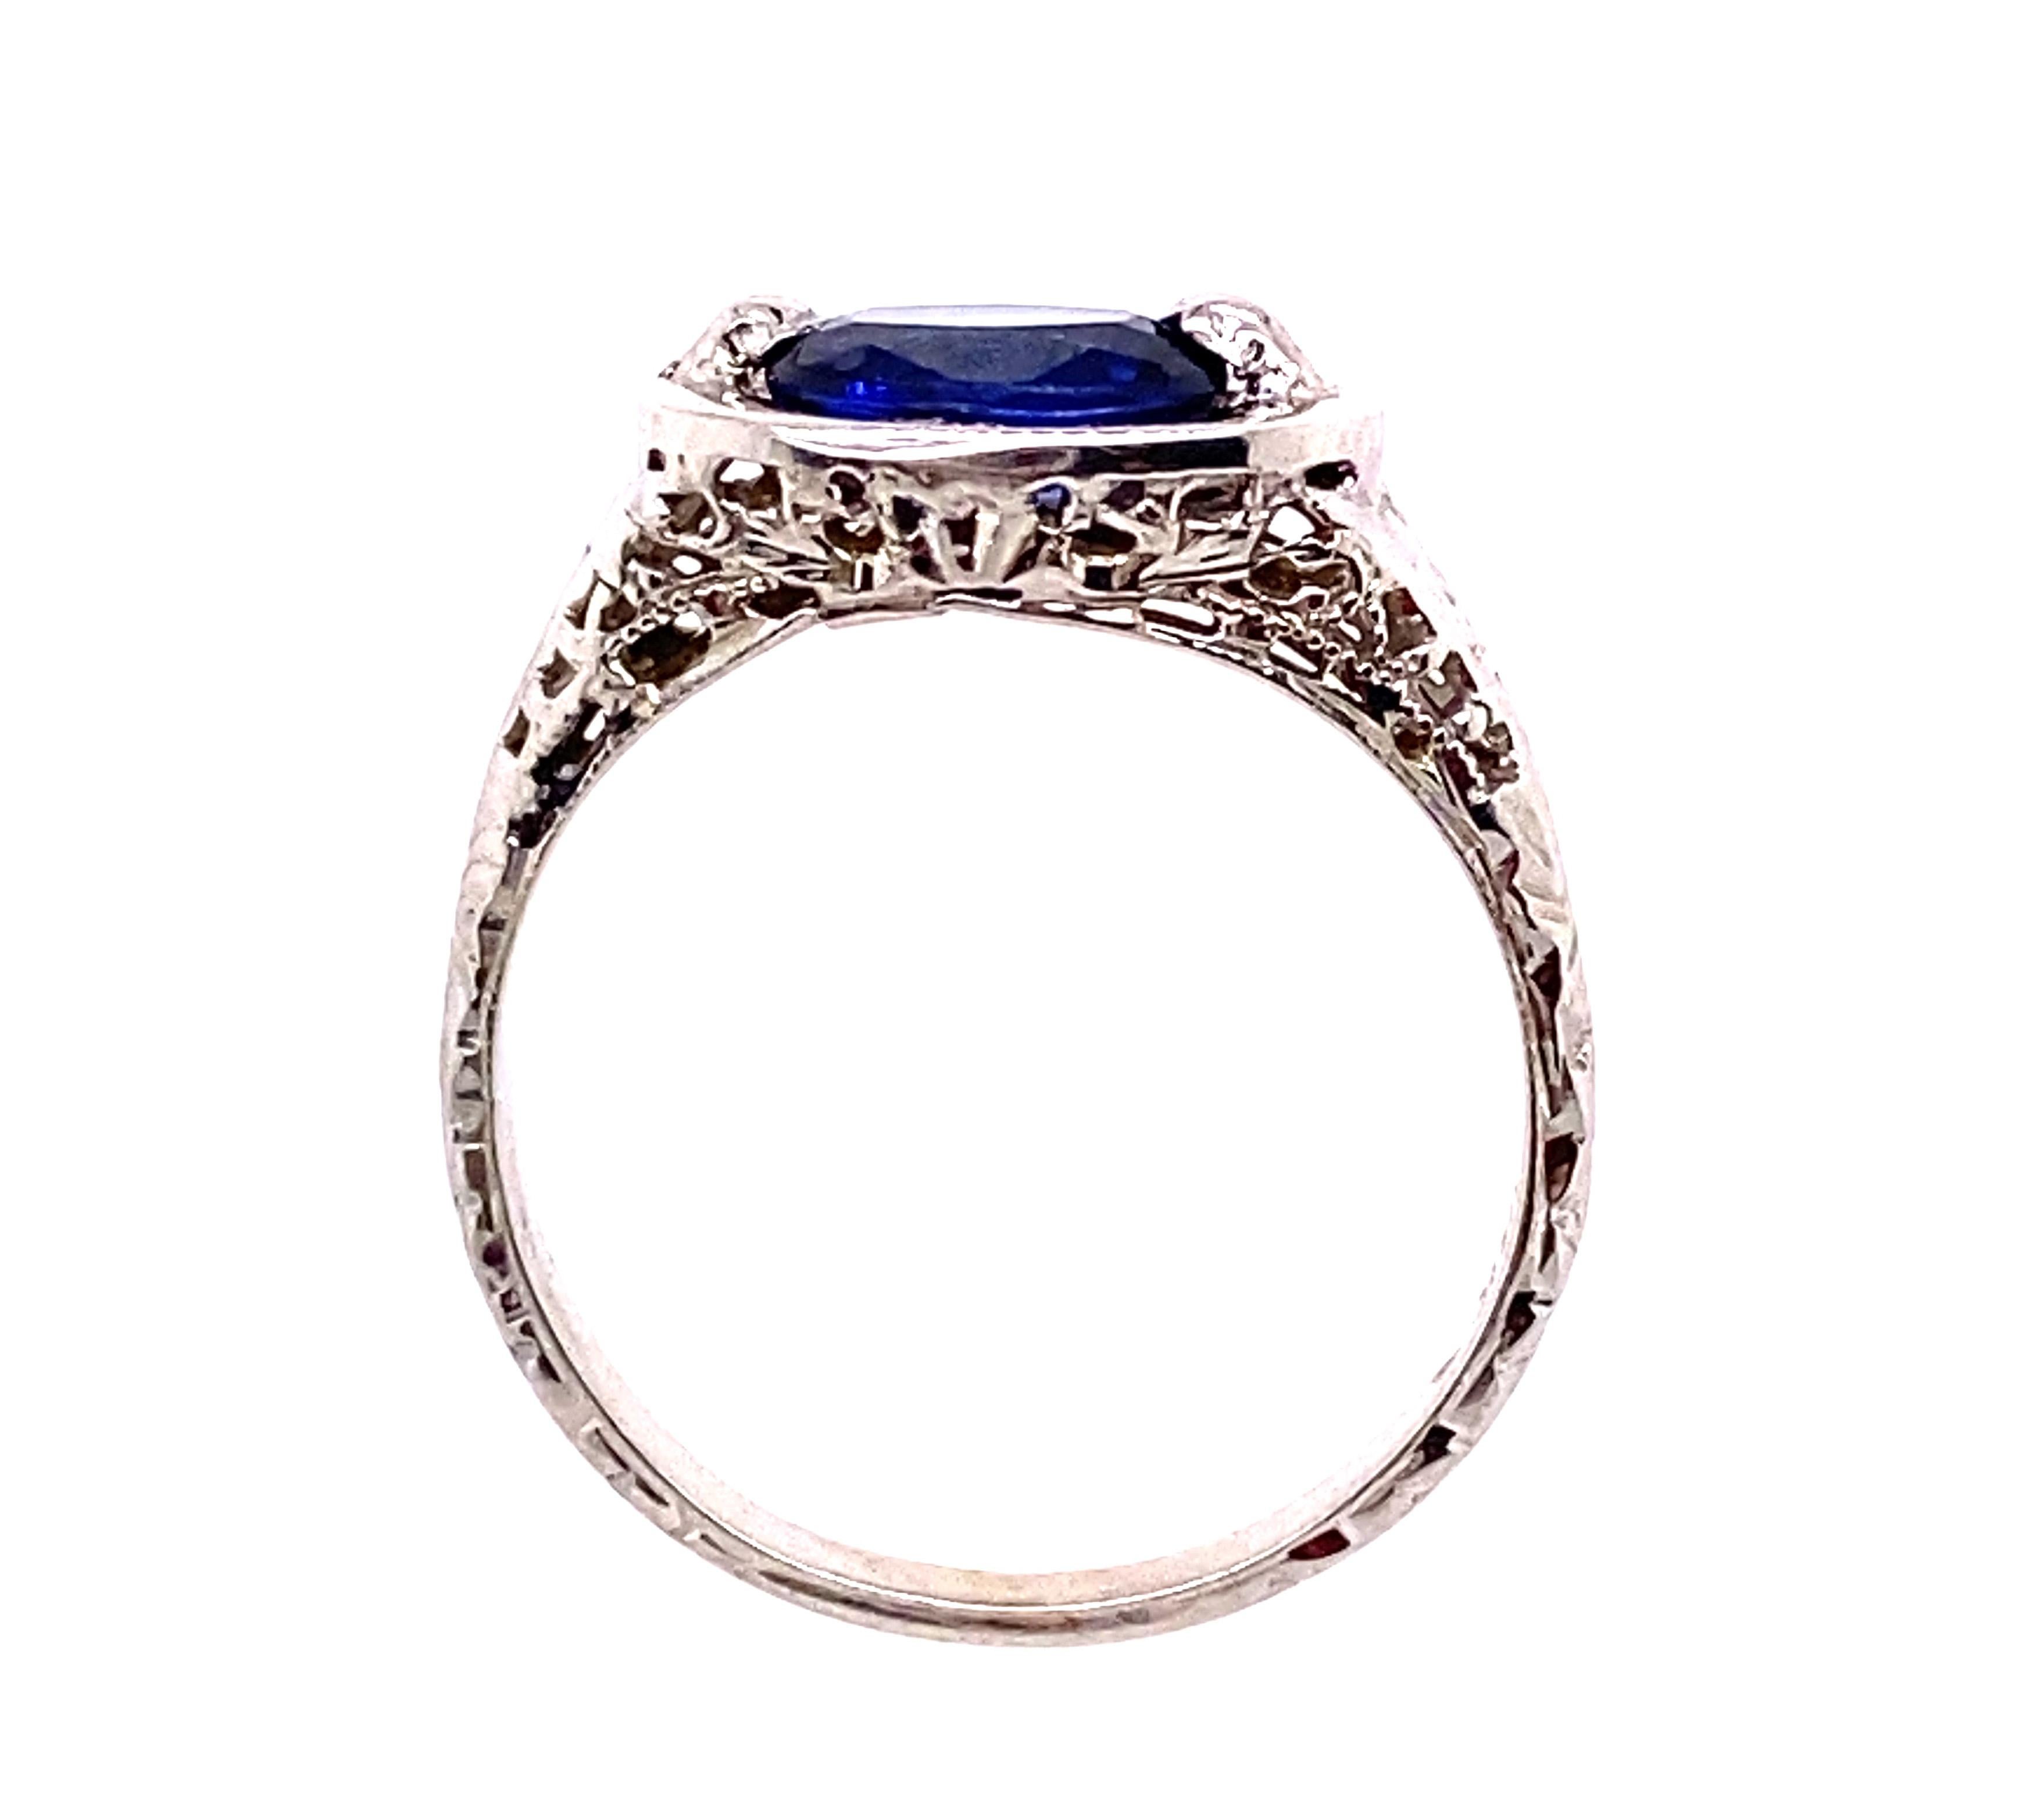 Vintage Sapphire Engagement Solitaire Ring 1.06ct Antique 18K White Gold Art Deco 


Featuring a Gorgeous 1.06ct Genuine Natural Blue Oval Sapphire Center

Vibrant Bold Blue Sapphire

Hand Carved Details Almost All the Way Down the Shank

Delicate